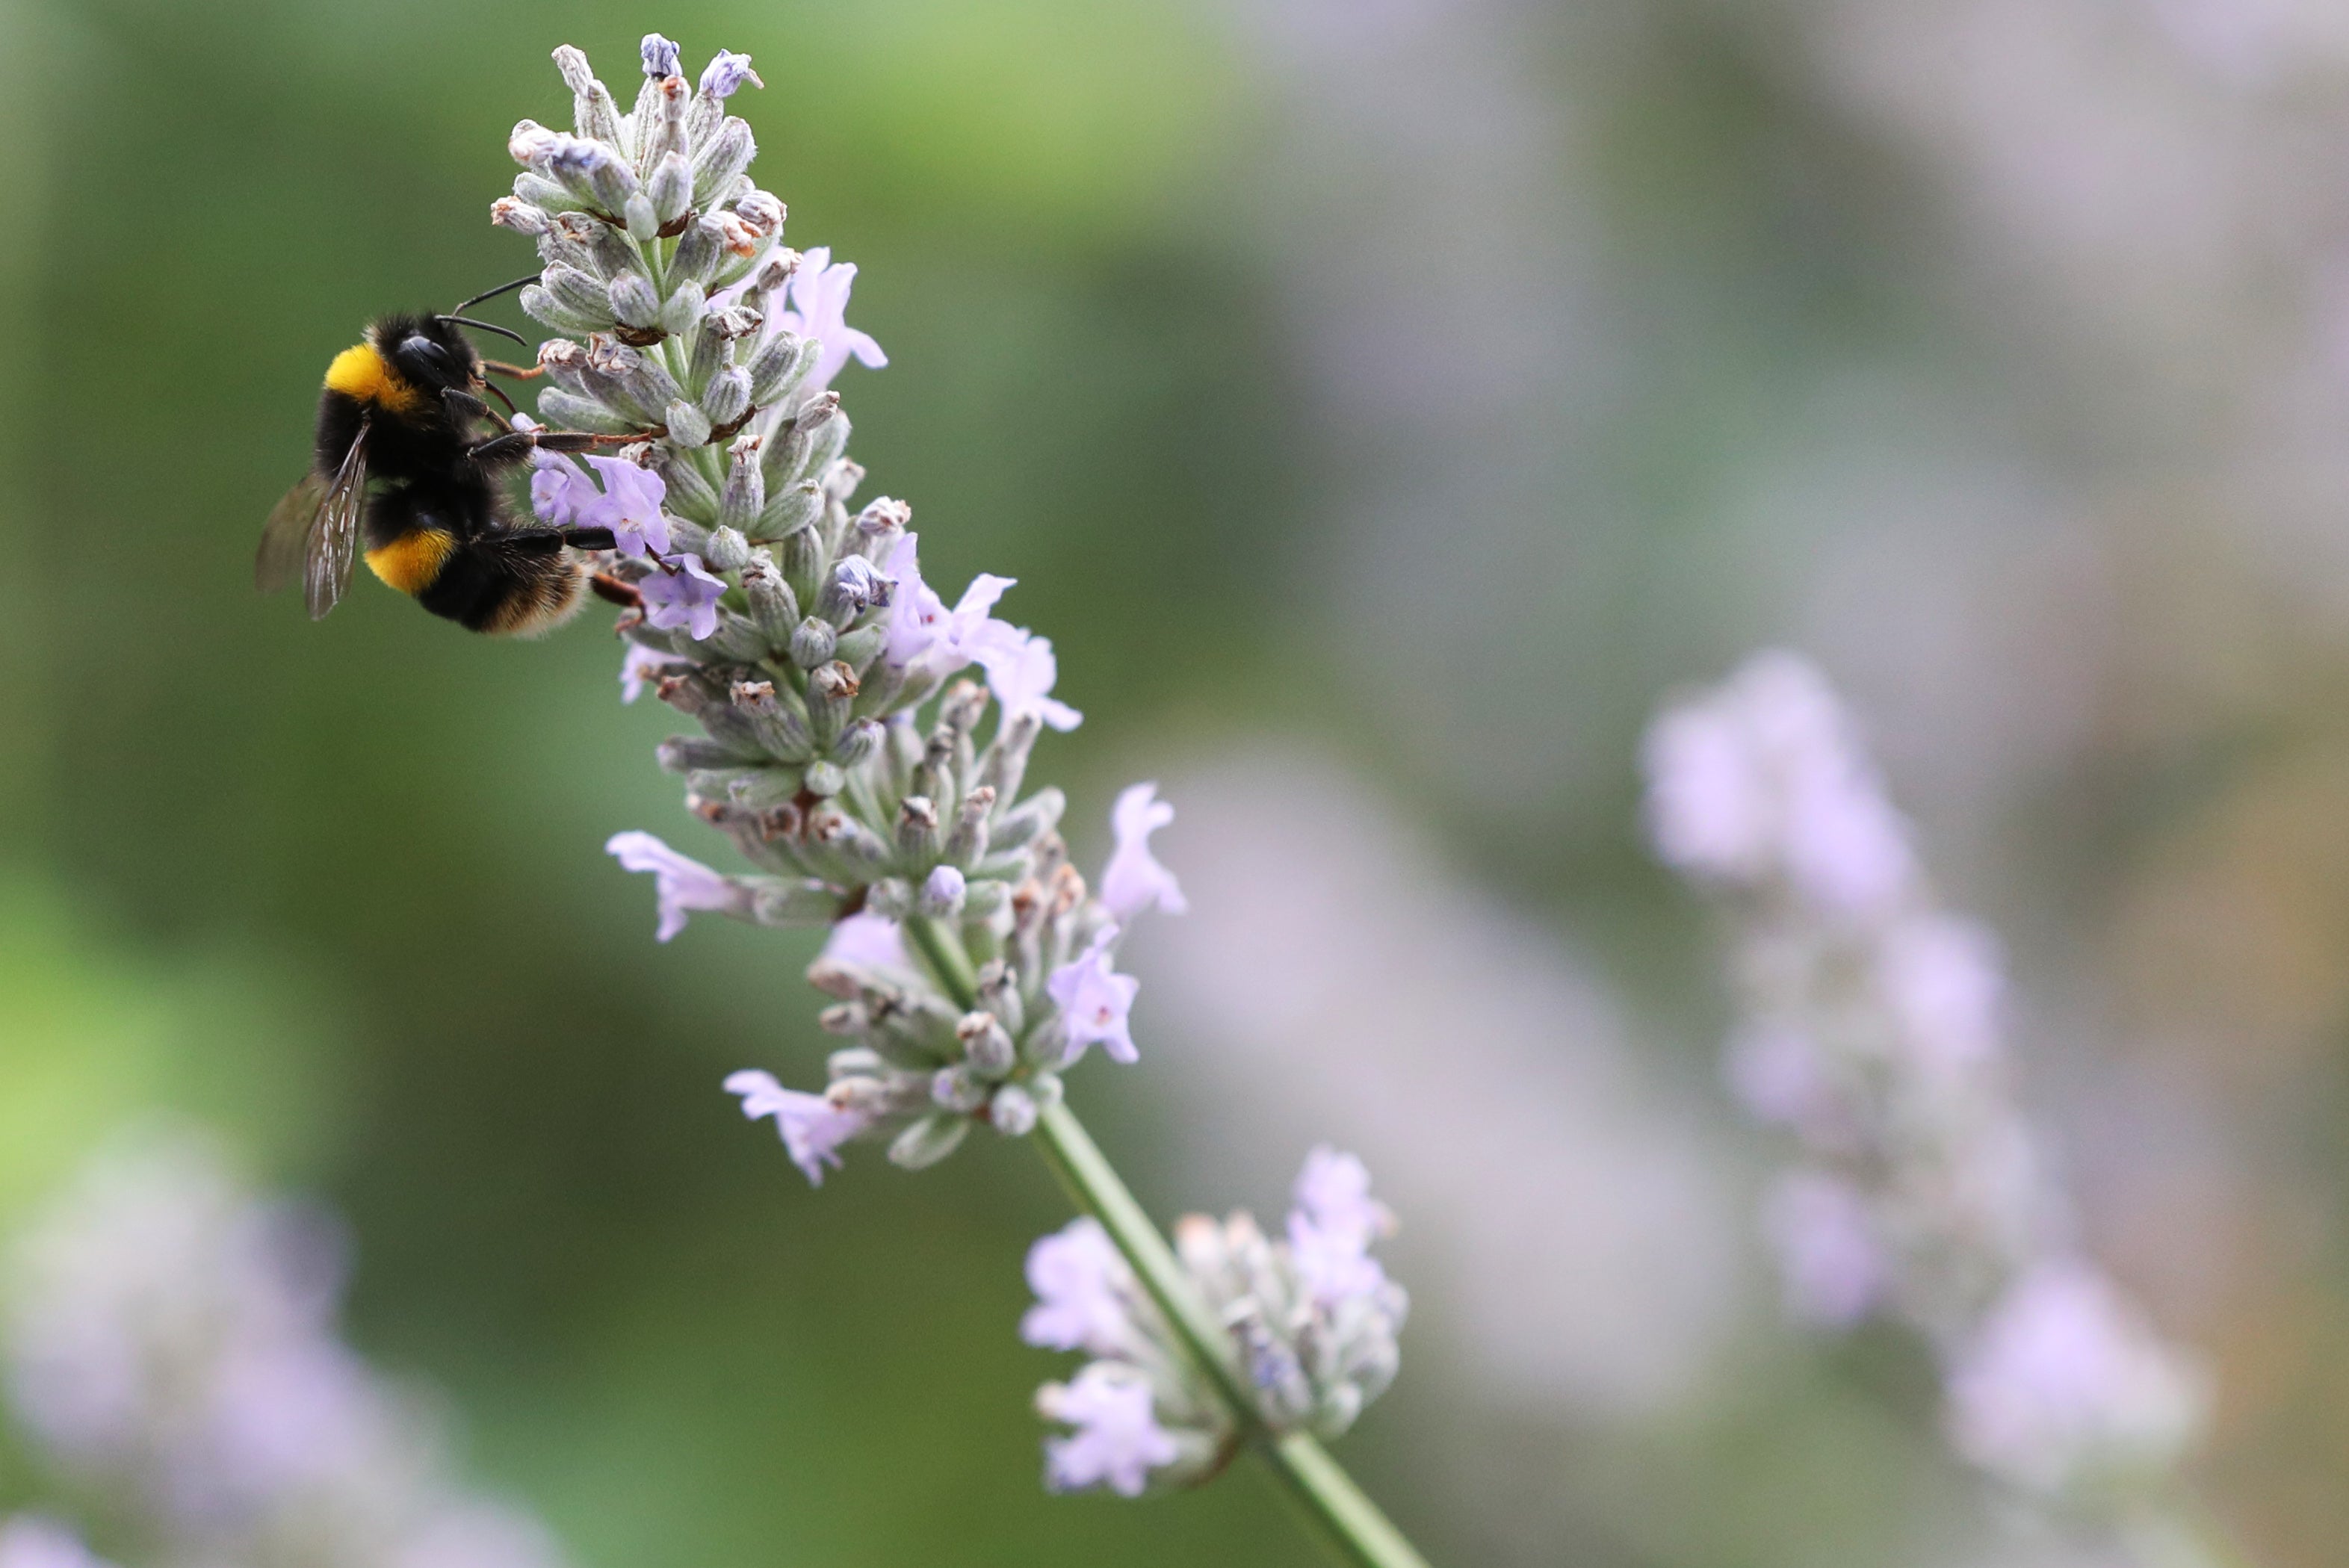 British bee populations are in steep decline